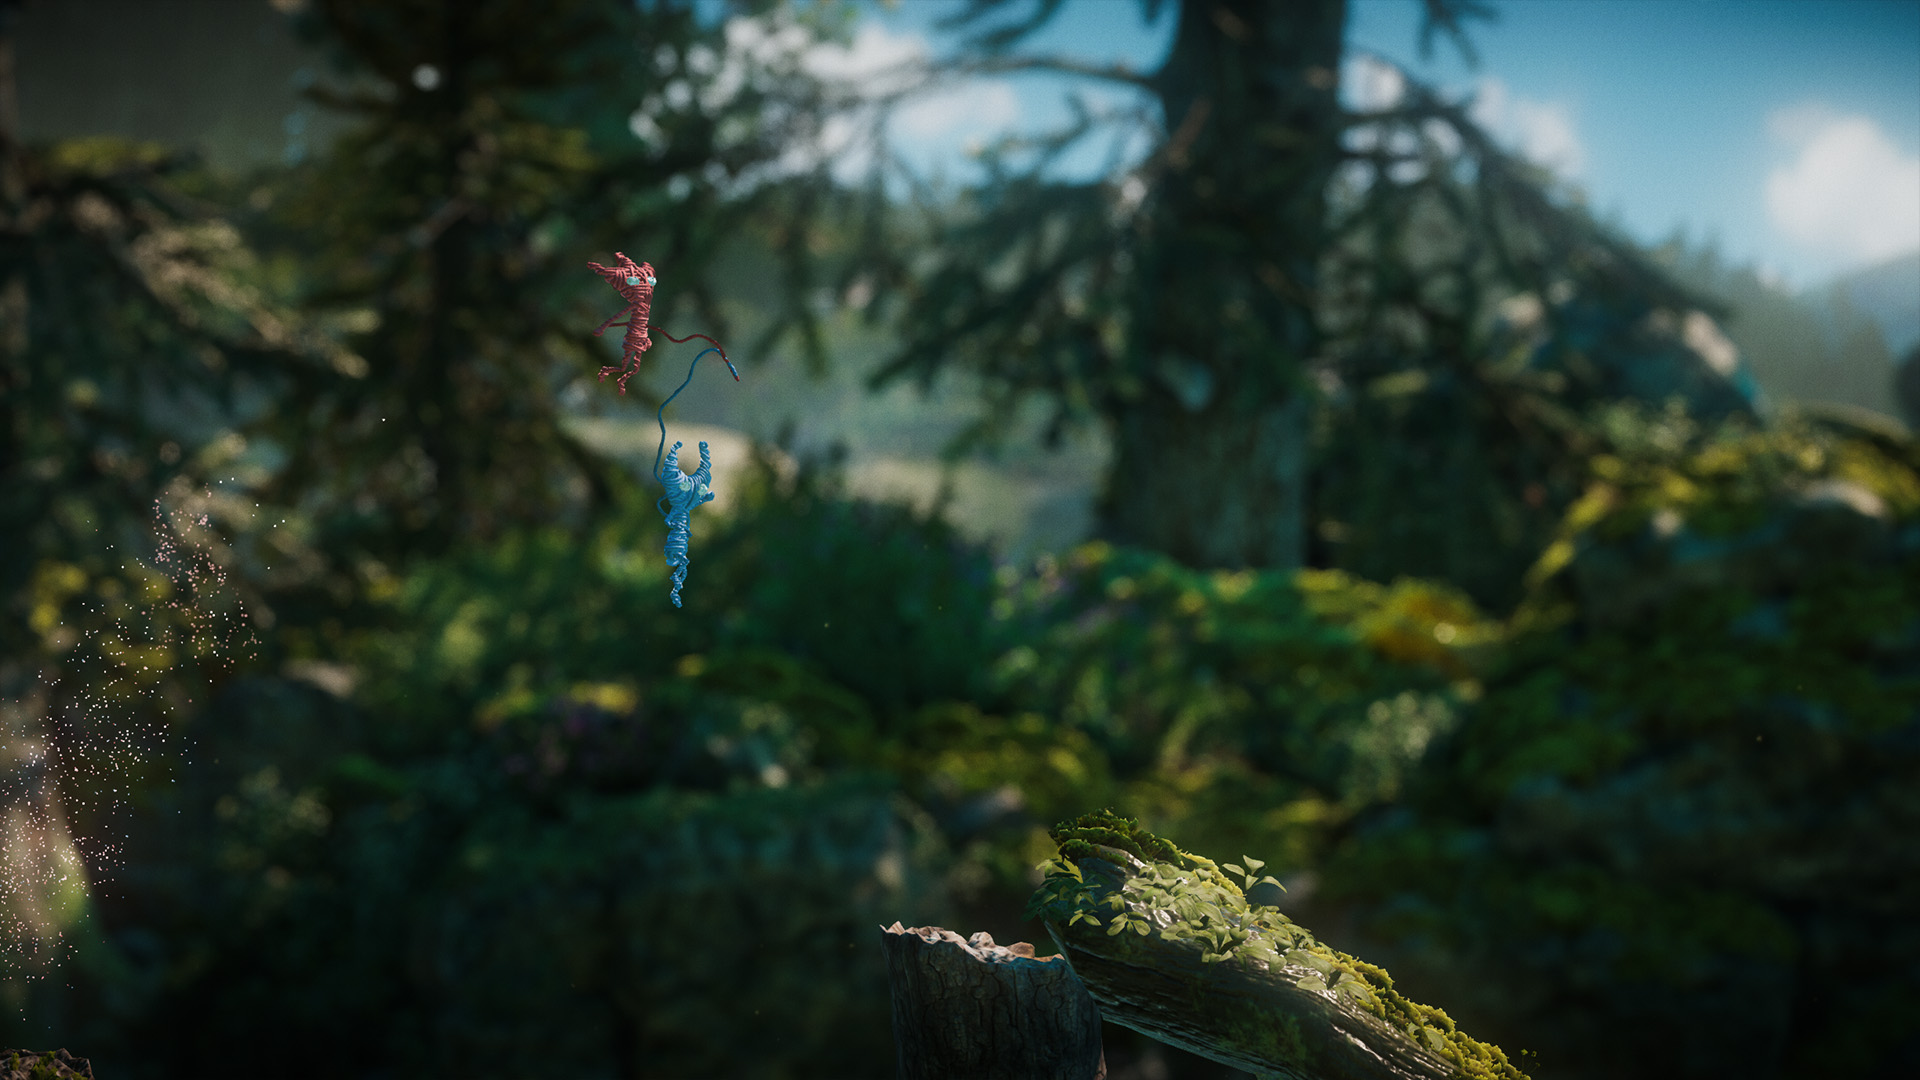 unravel two multiplayer online